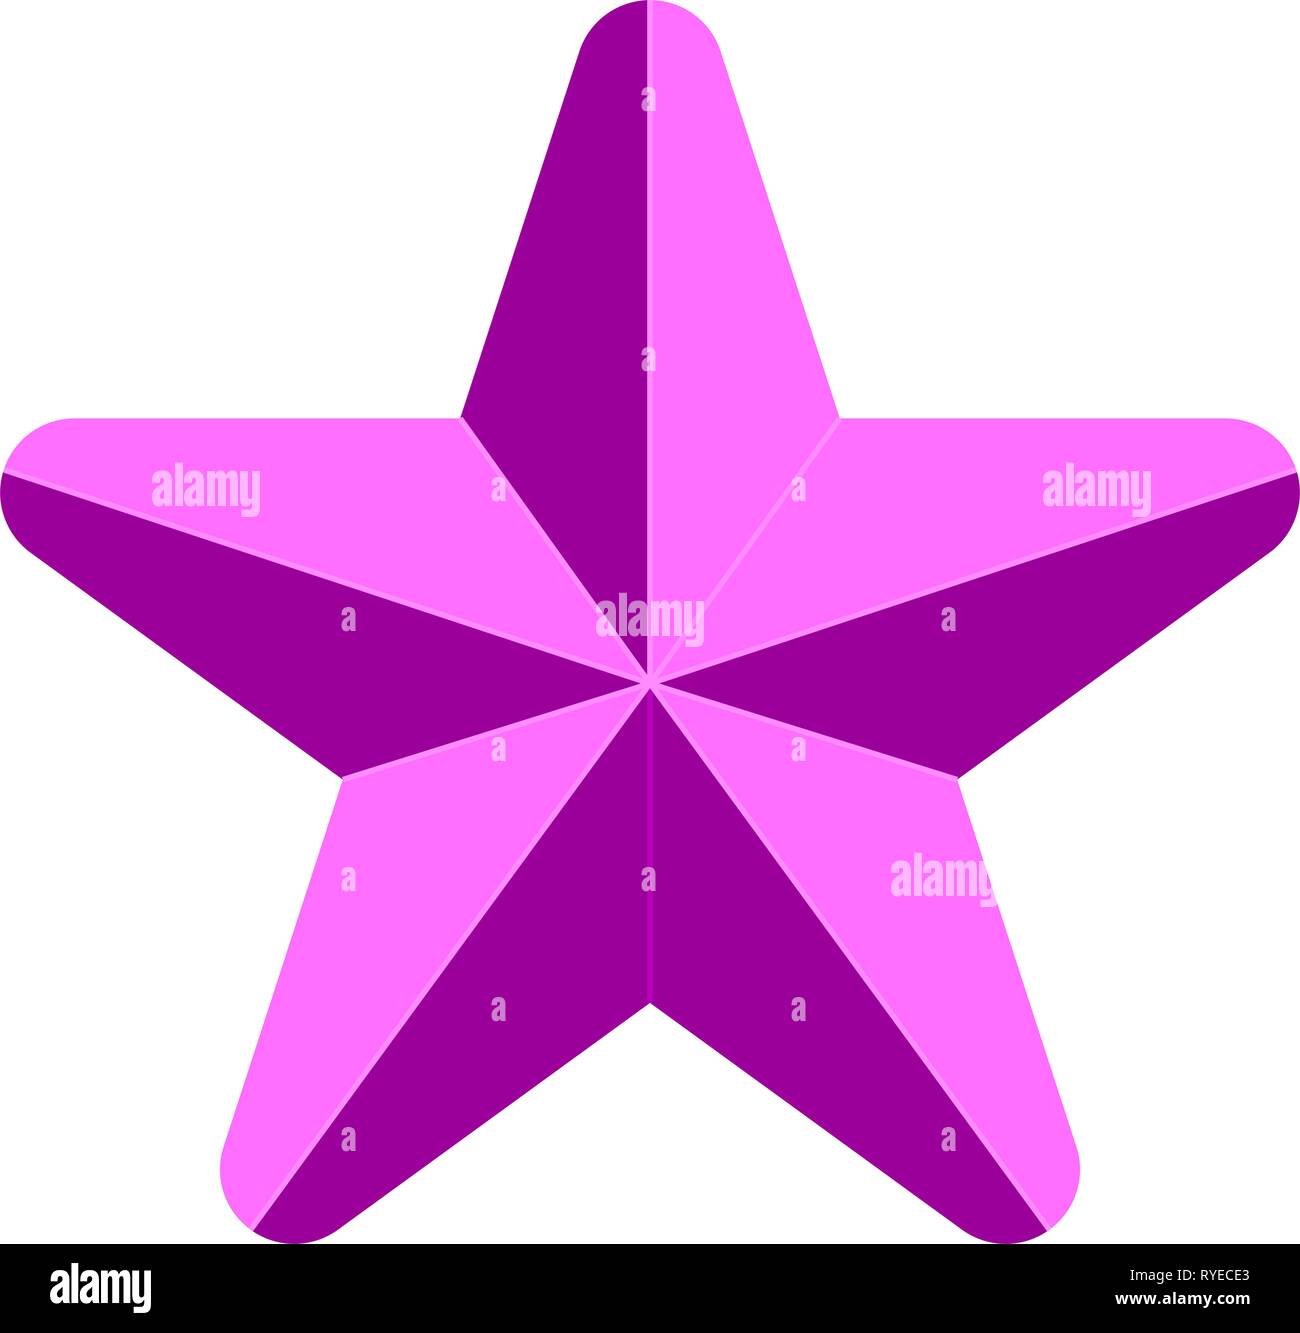 Star symbol icon - purple simple 3d, 5 pointed rounded, isolated - vector illustration Stock Vector